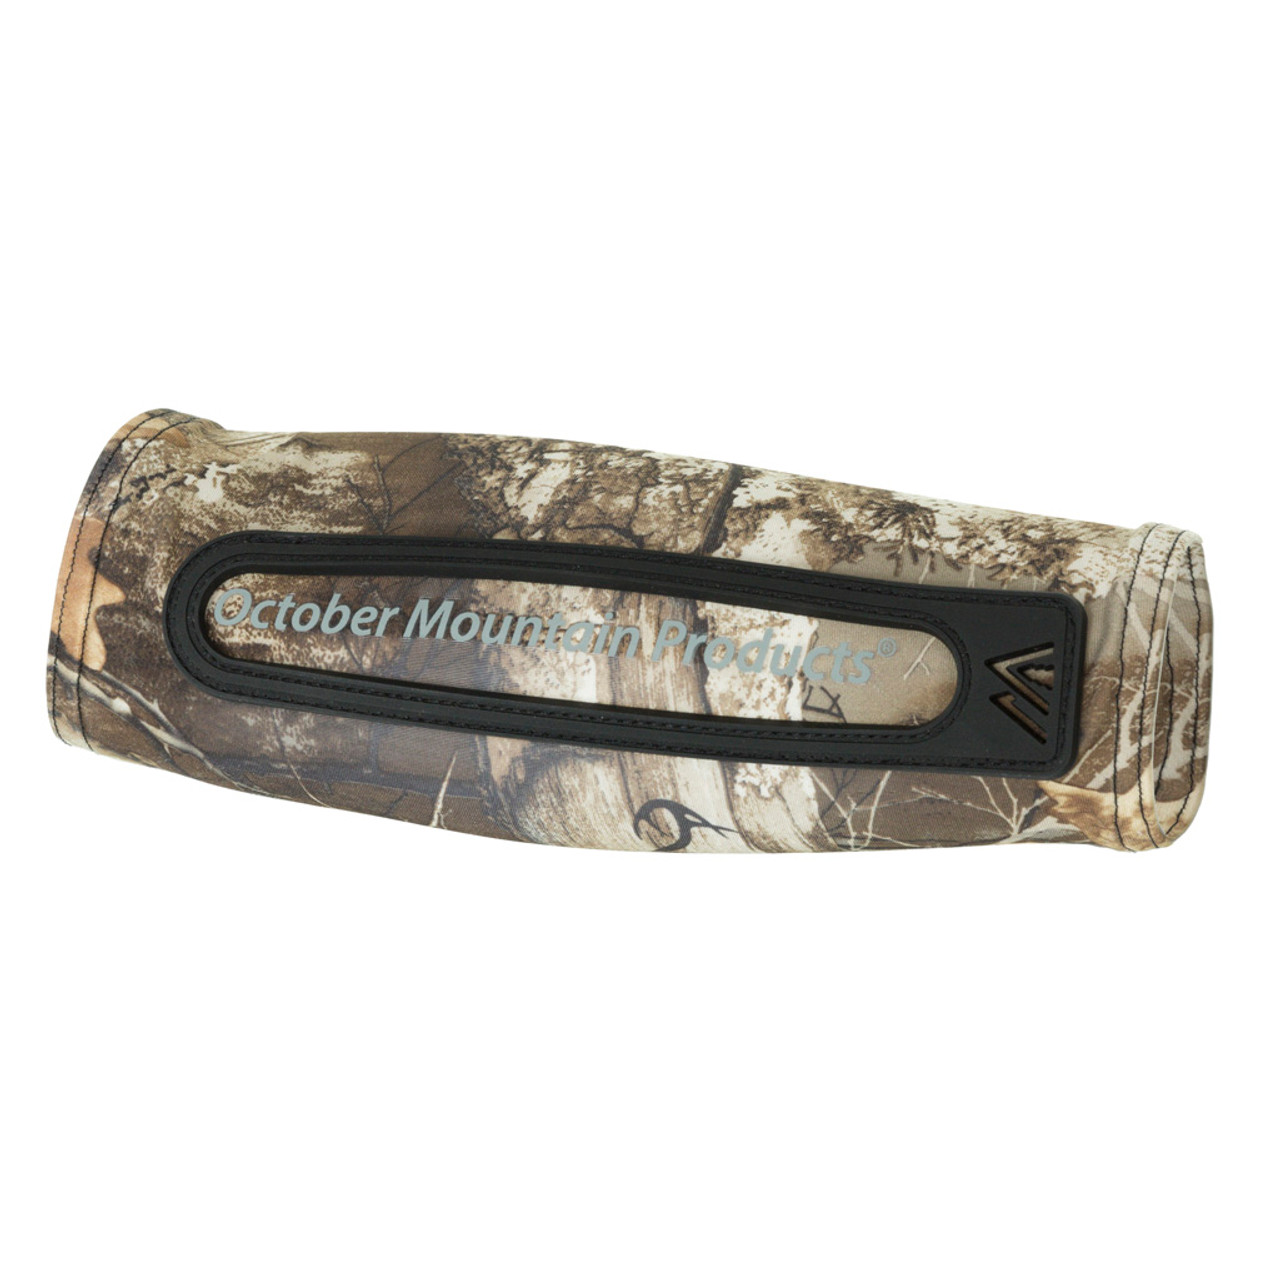 October Mountain - 1601160 - October Mountain Compression Arm Guard Realtree Edge Standard Fit